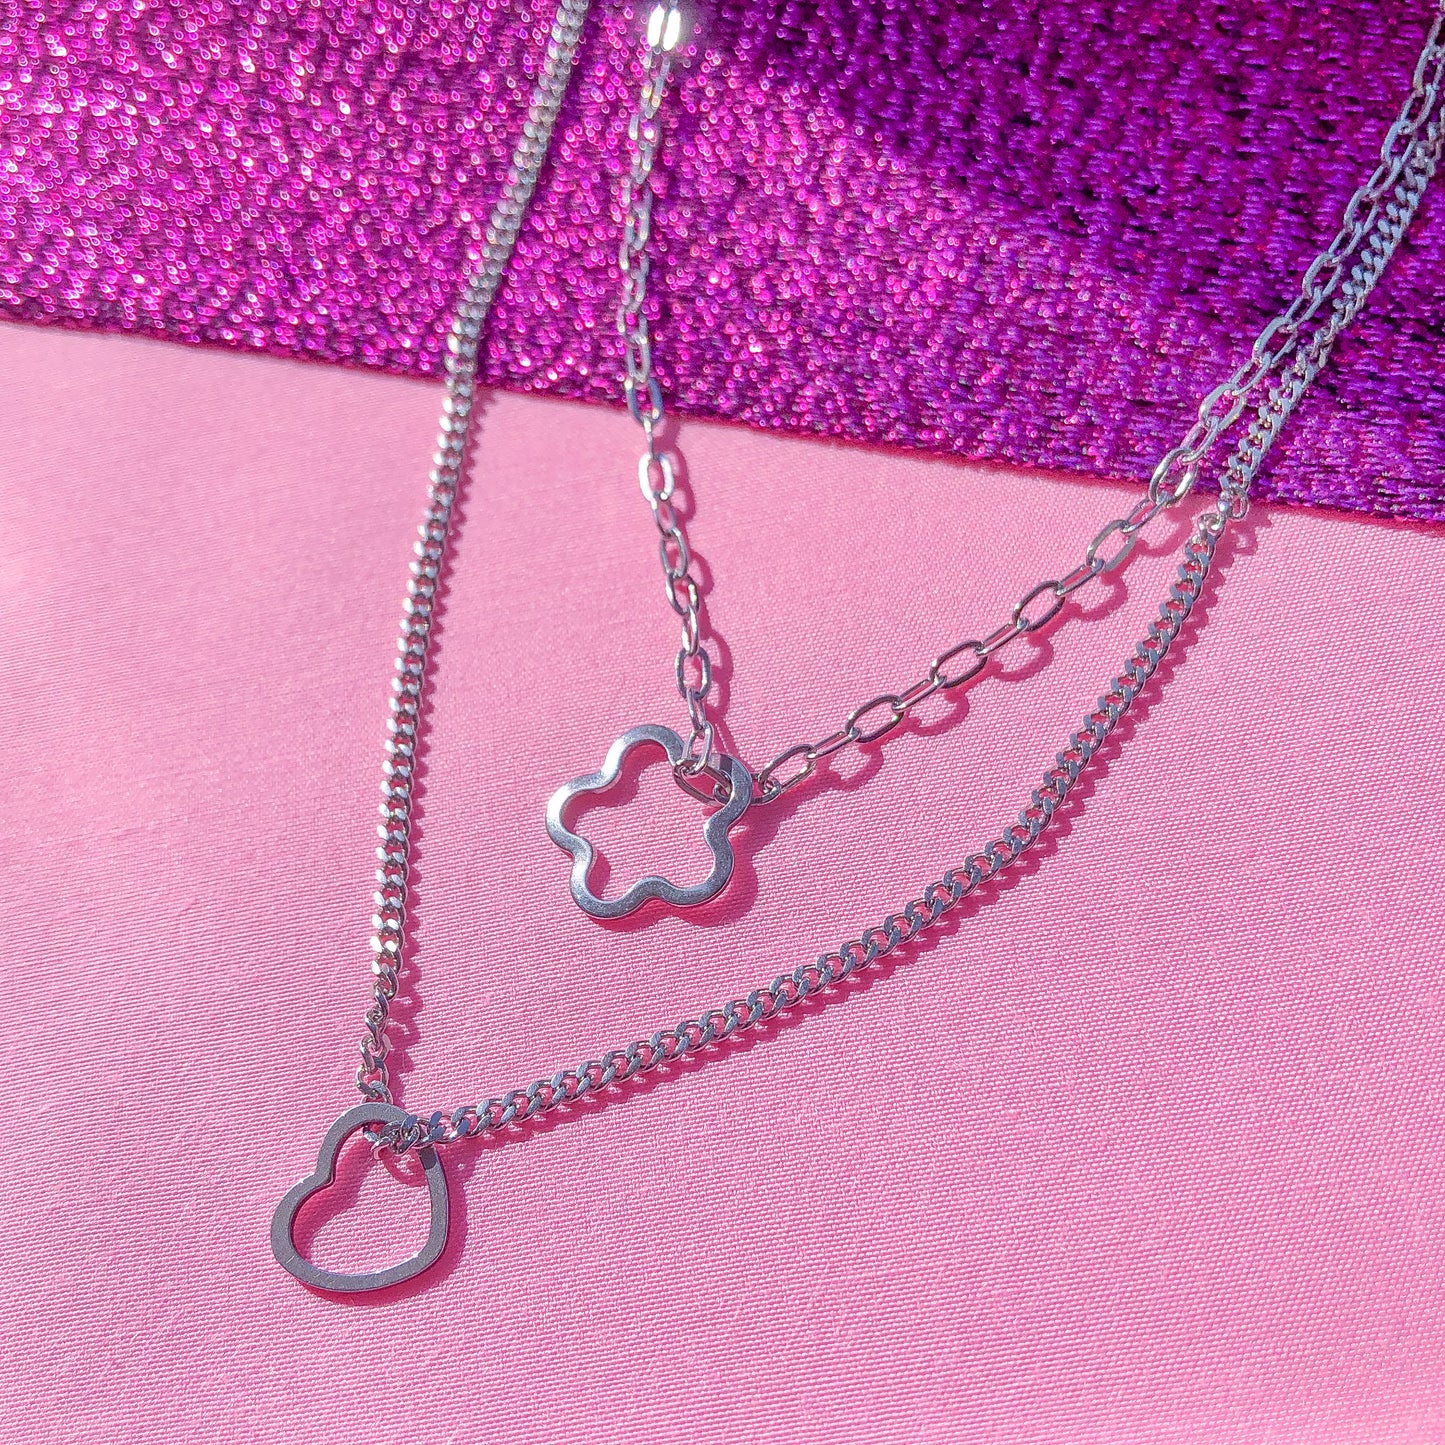 Layered stainless steel necklace with love heart and flower charm